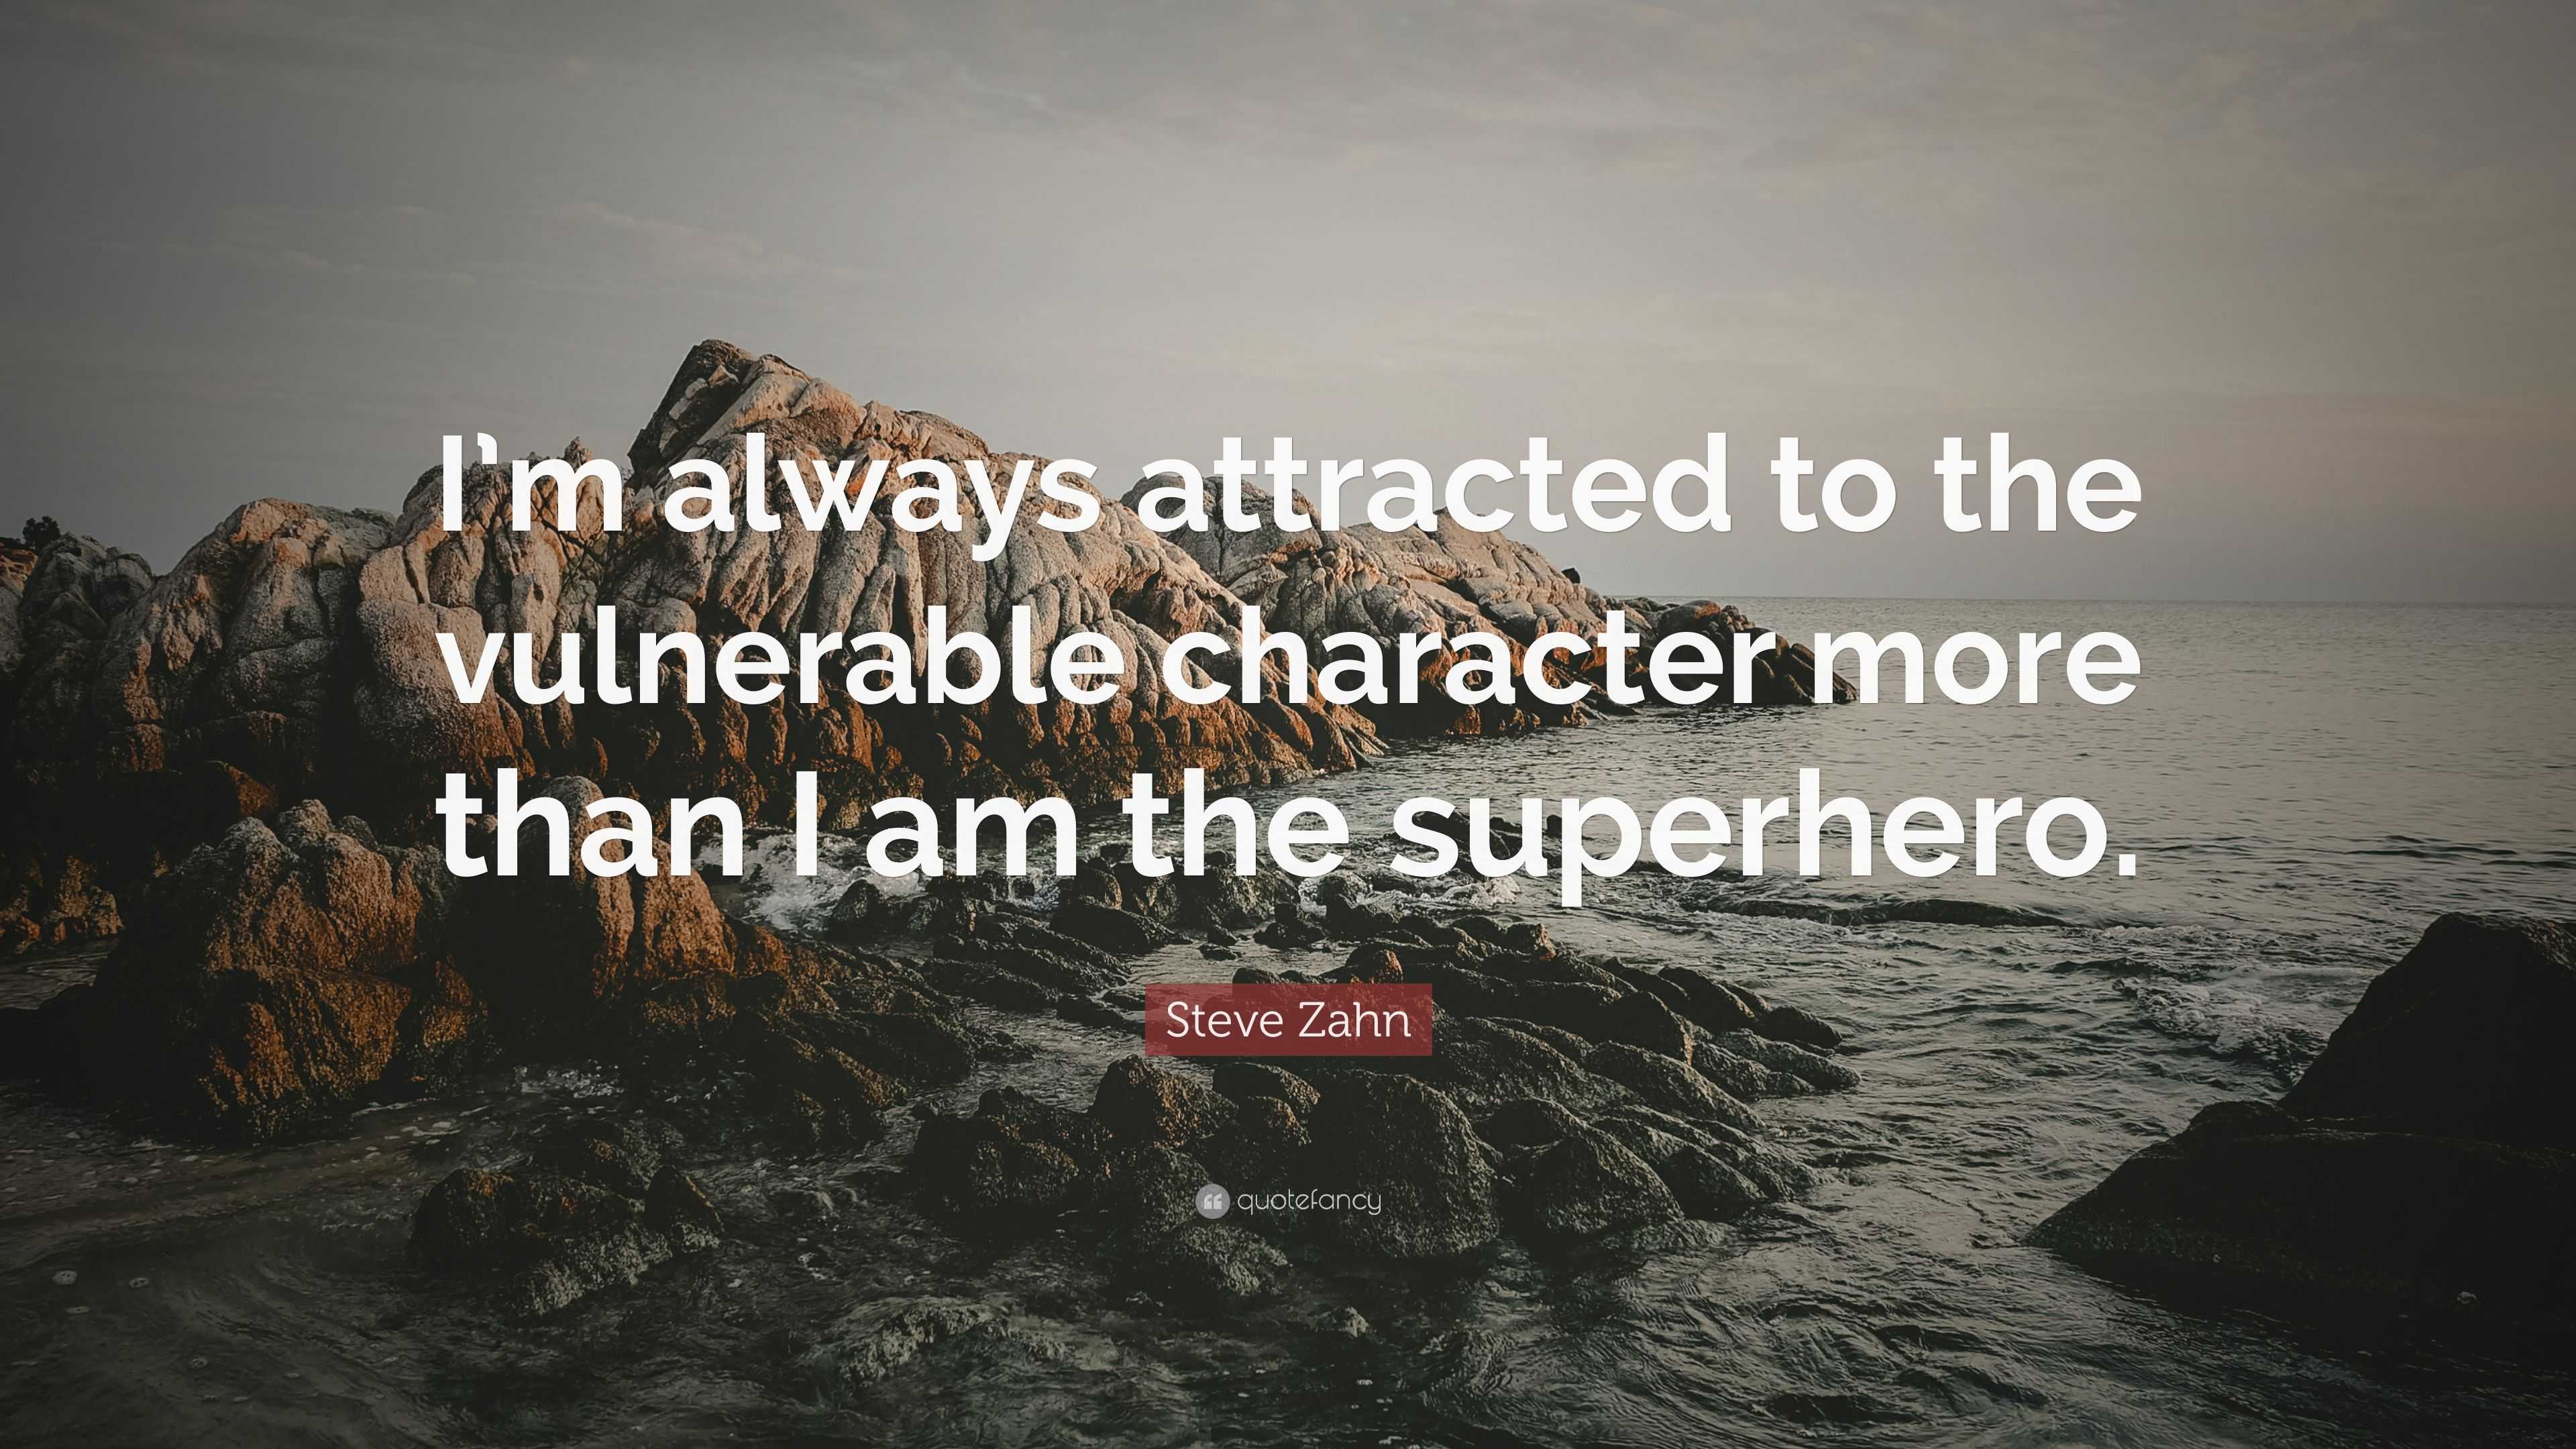 Steve Zahn Quote: “I’m always attracted to the vulnerable character ...